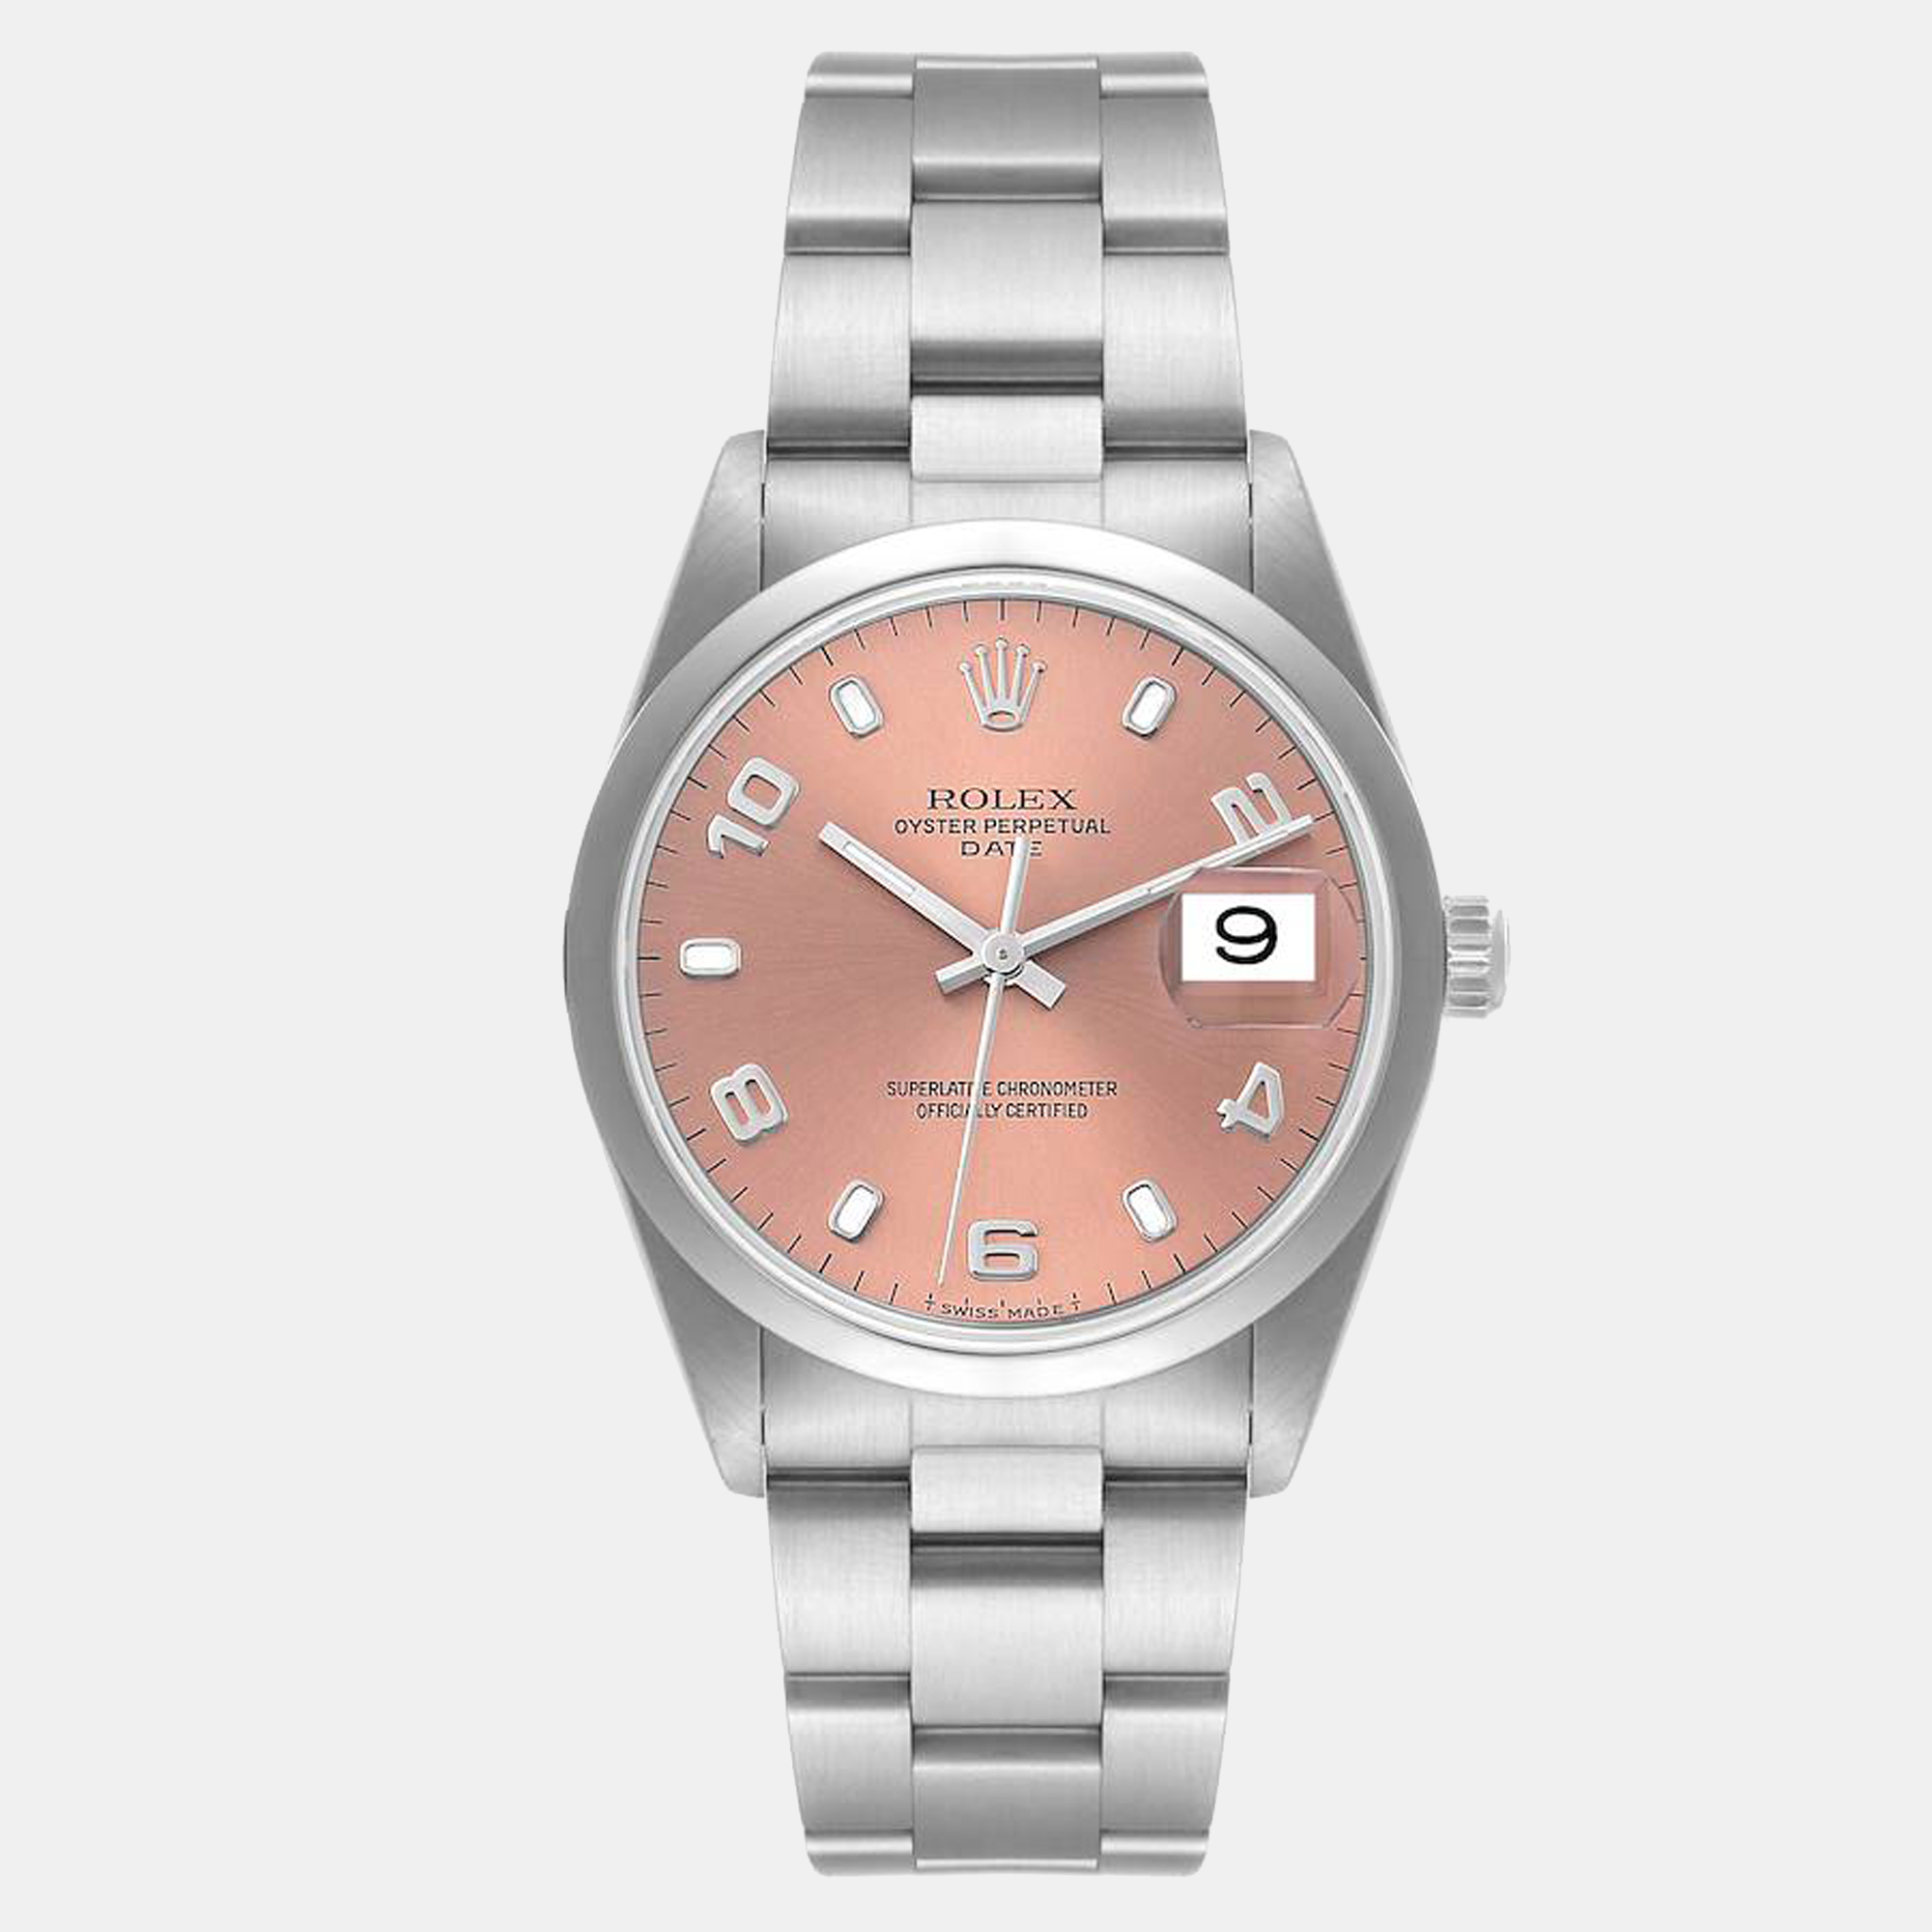 Rolex pink stainless steel oyster perpetual date 15200 men's wristwatch 34 mm